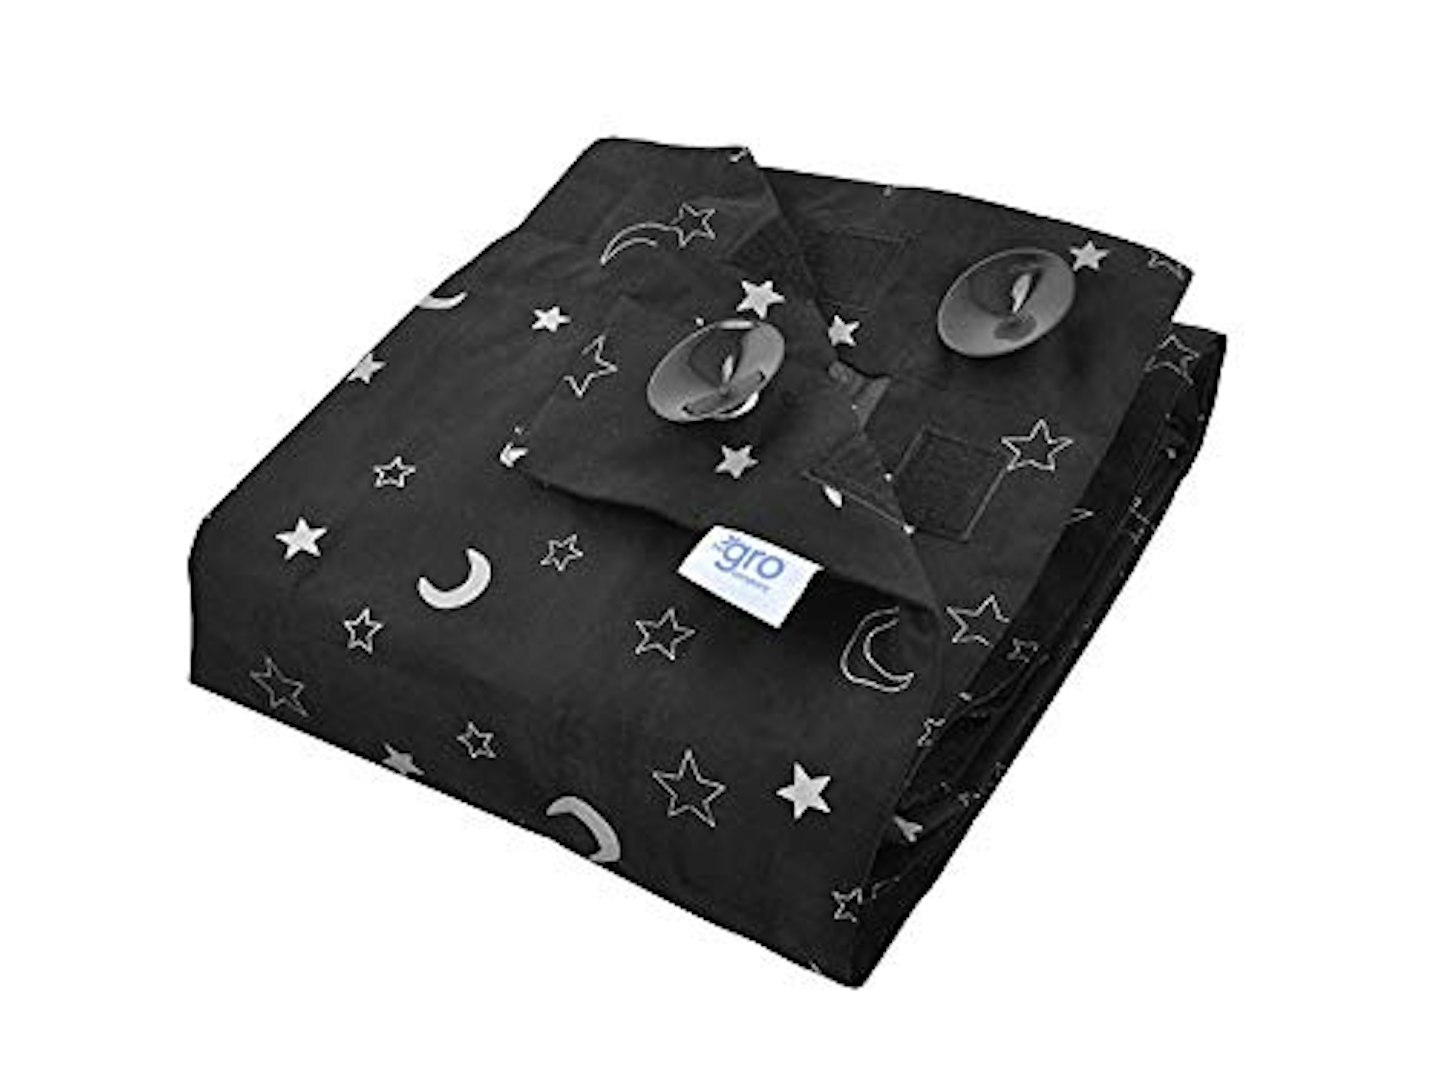 The Gro Company Stars and Moons Gro Anywhere Portable Blackout Blind with Suction Cups 